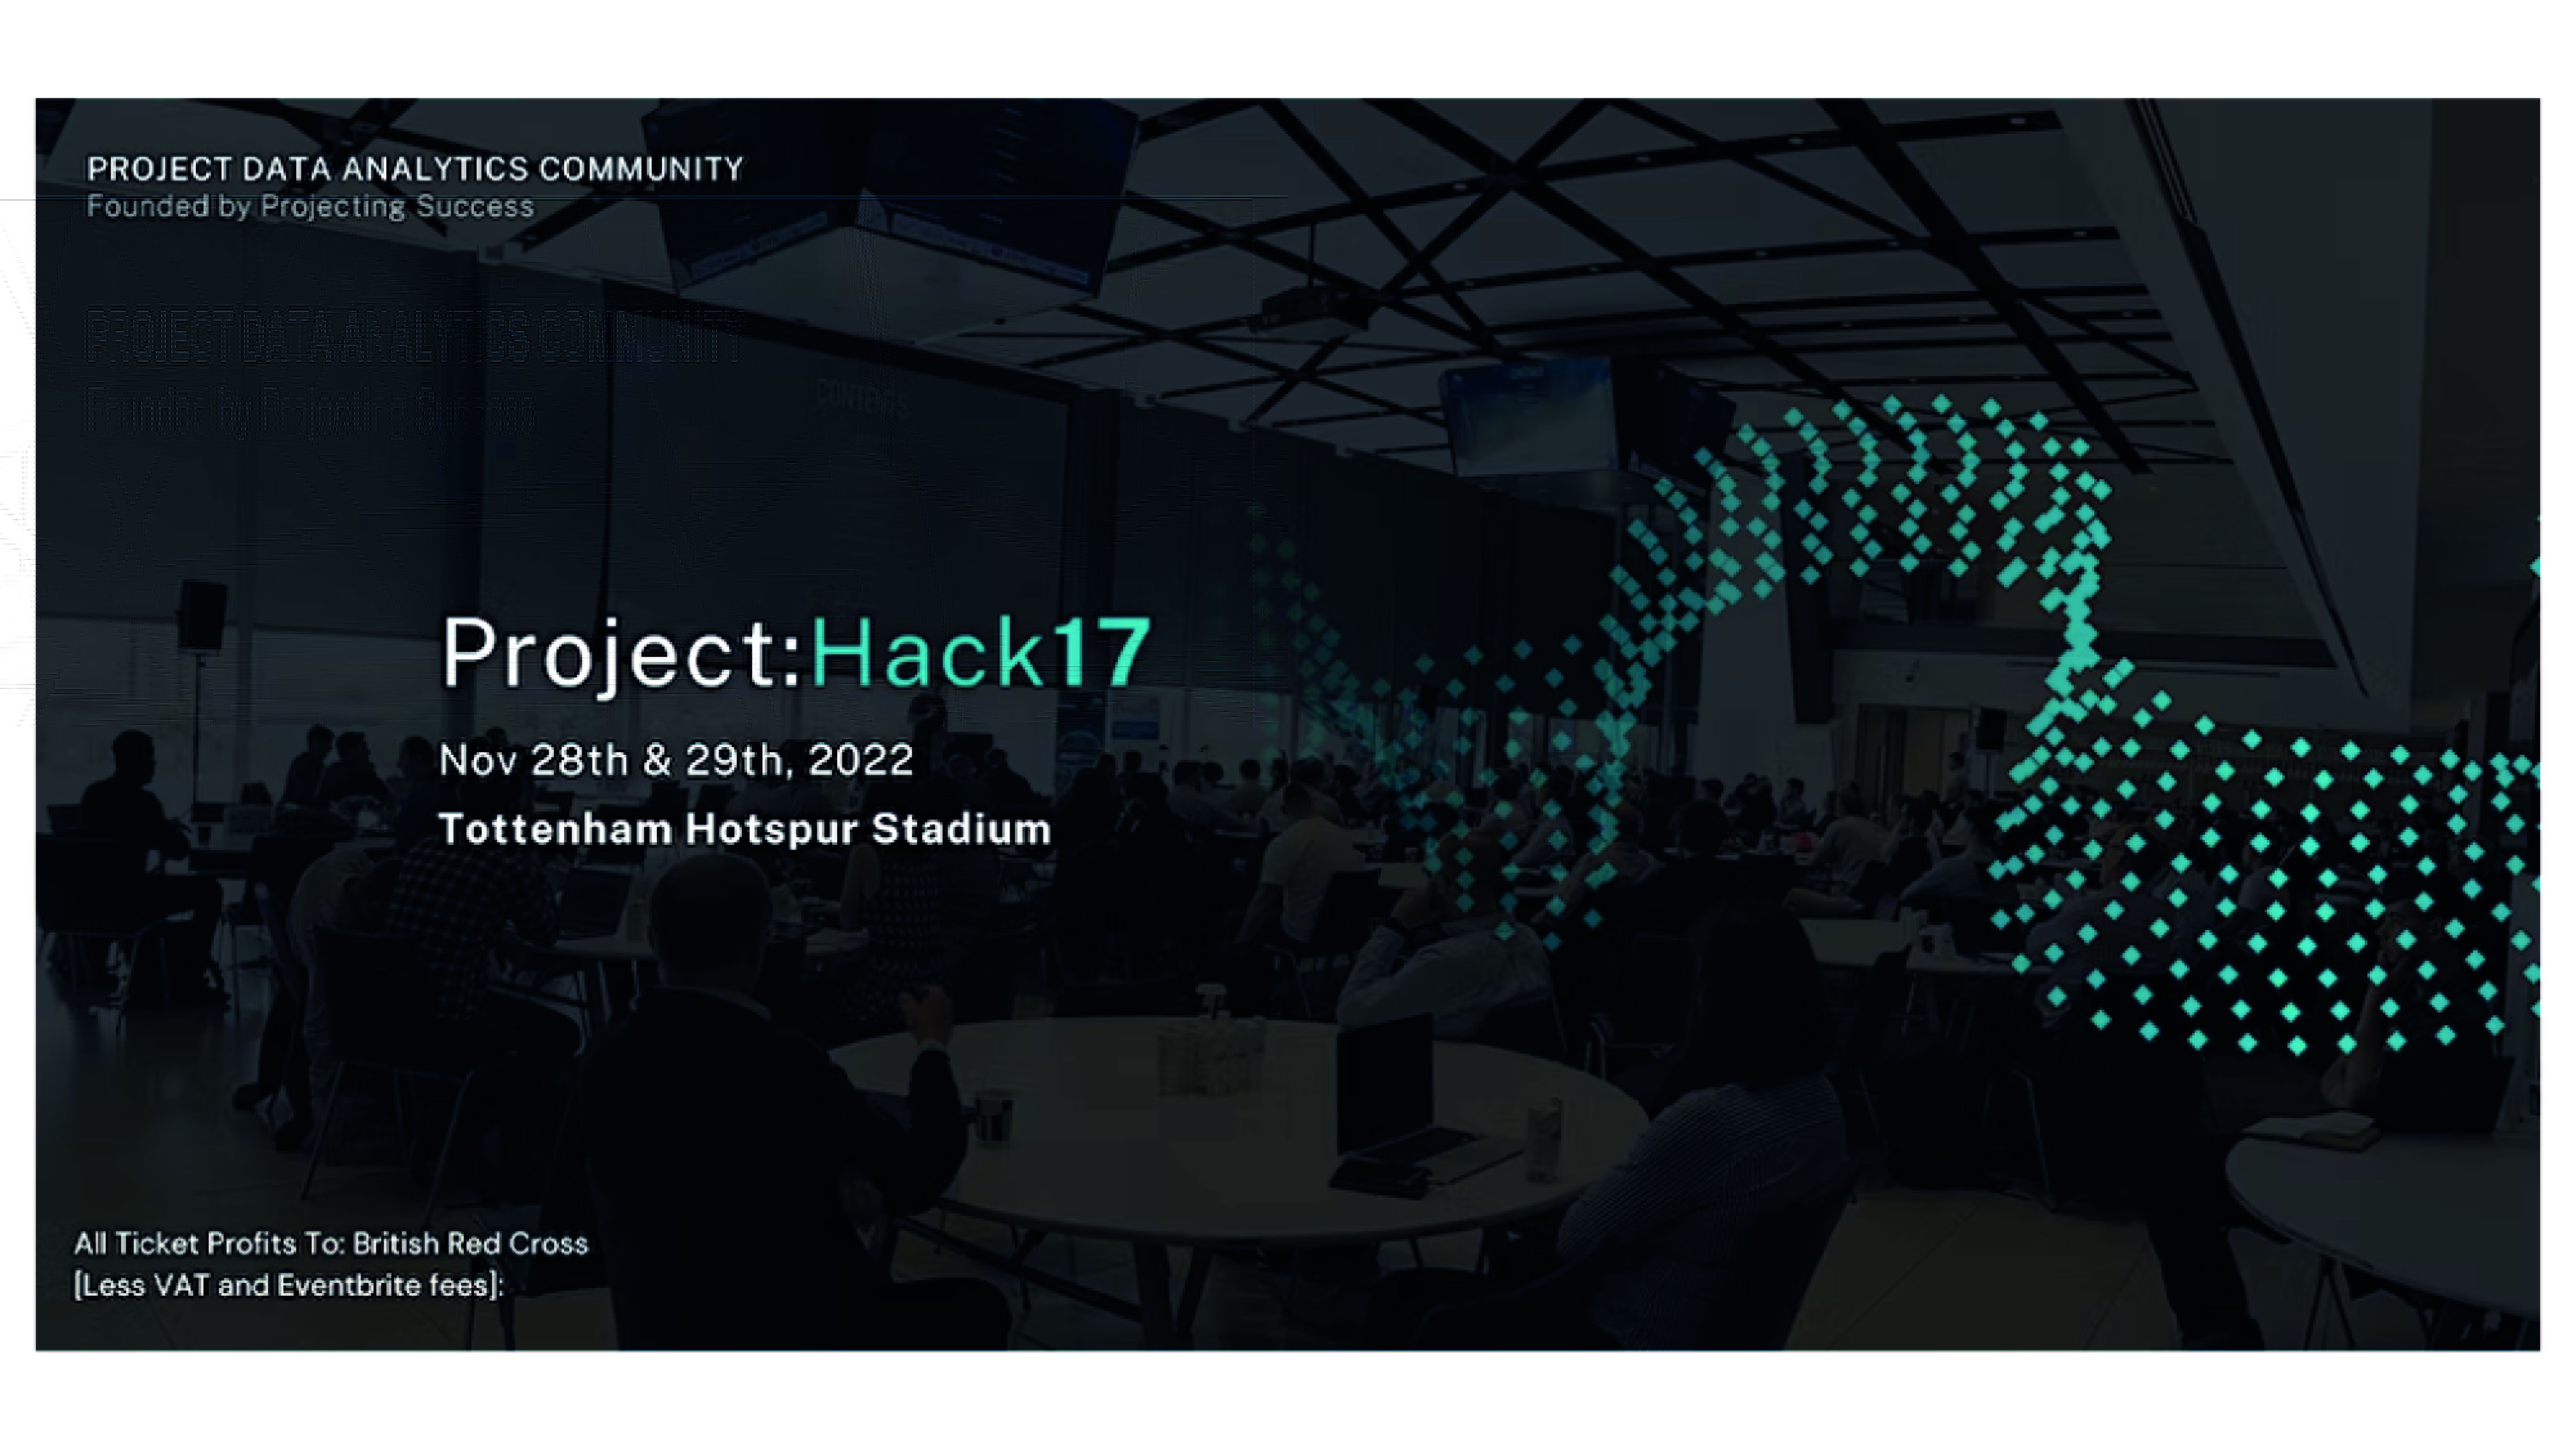 Project: Hack 17 by Projecting Success